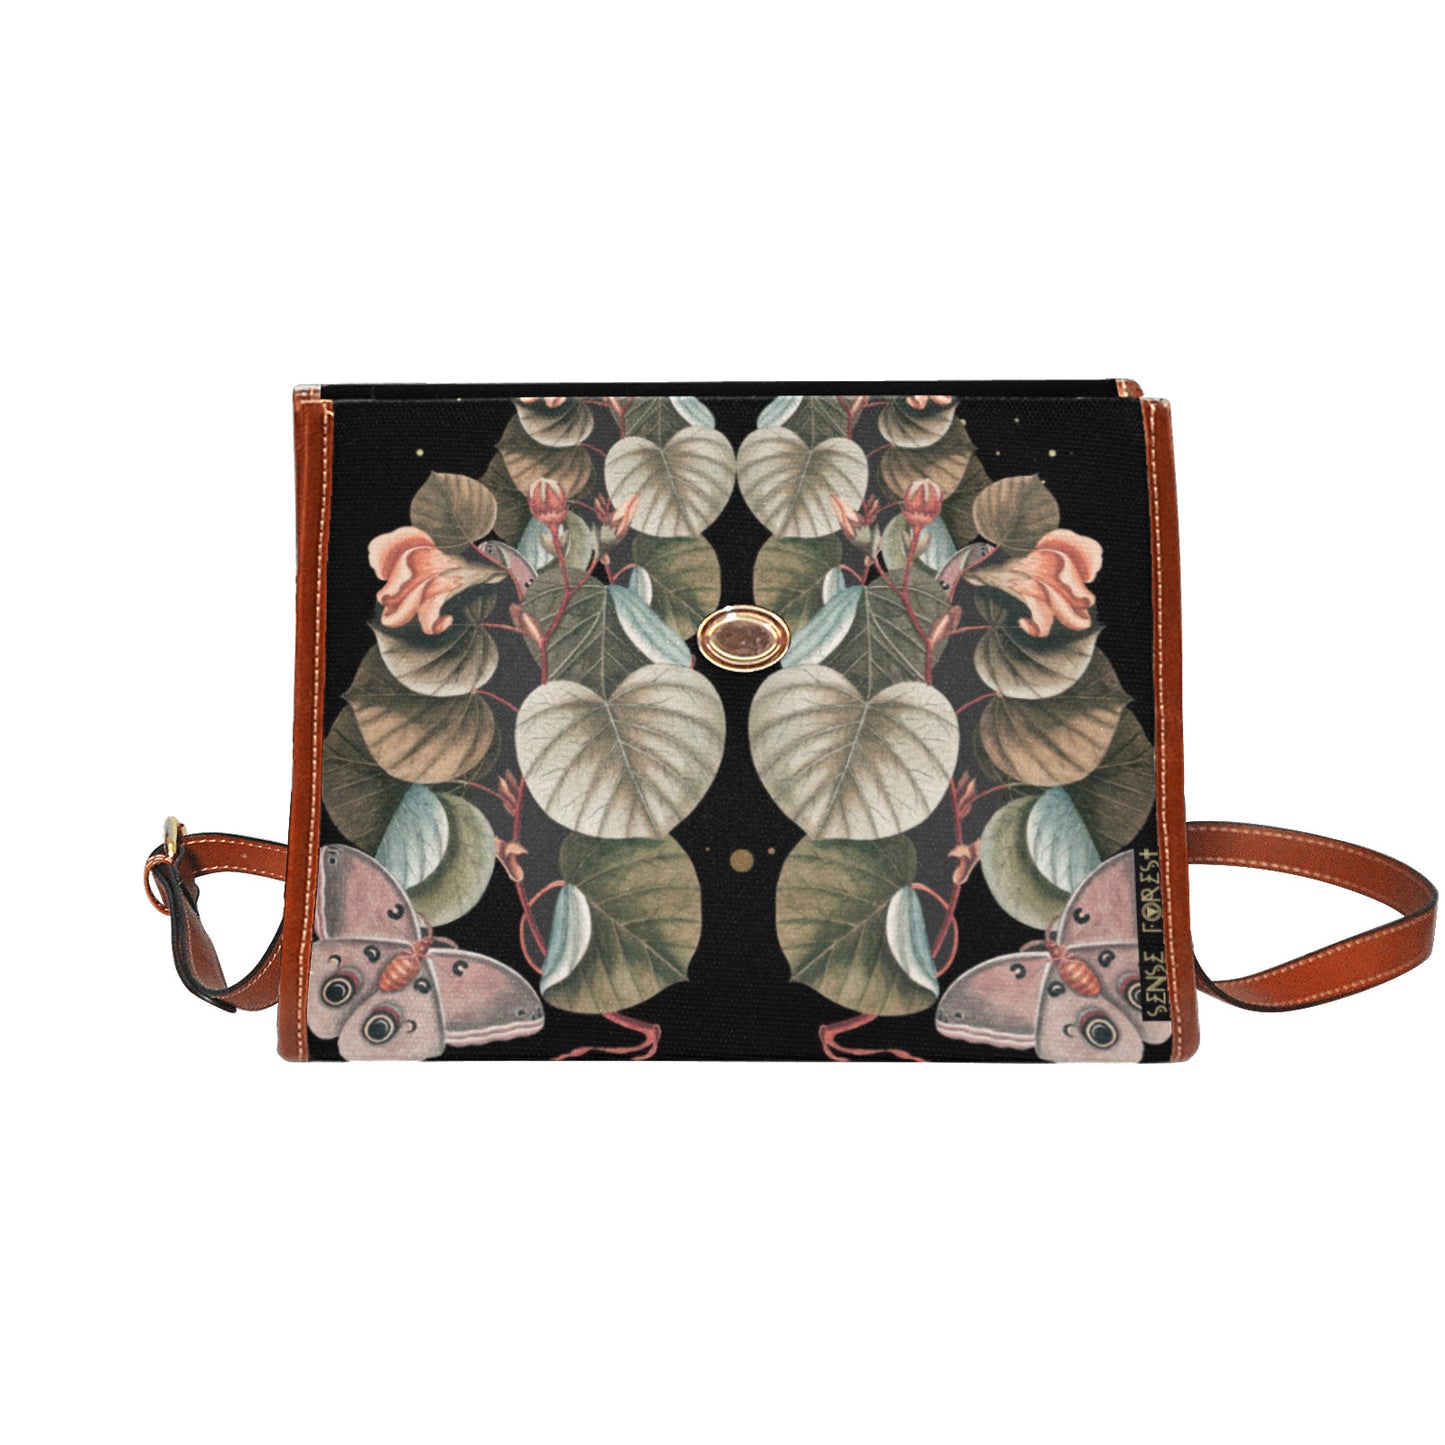 Moth Moon Phase Butterfly Garden Witch Canvas satchel Bag